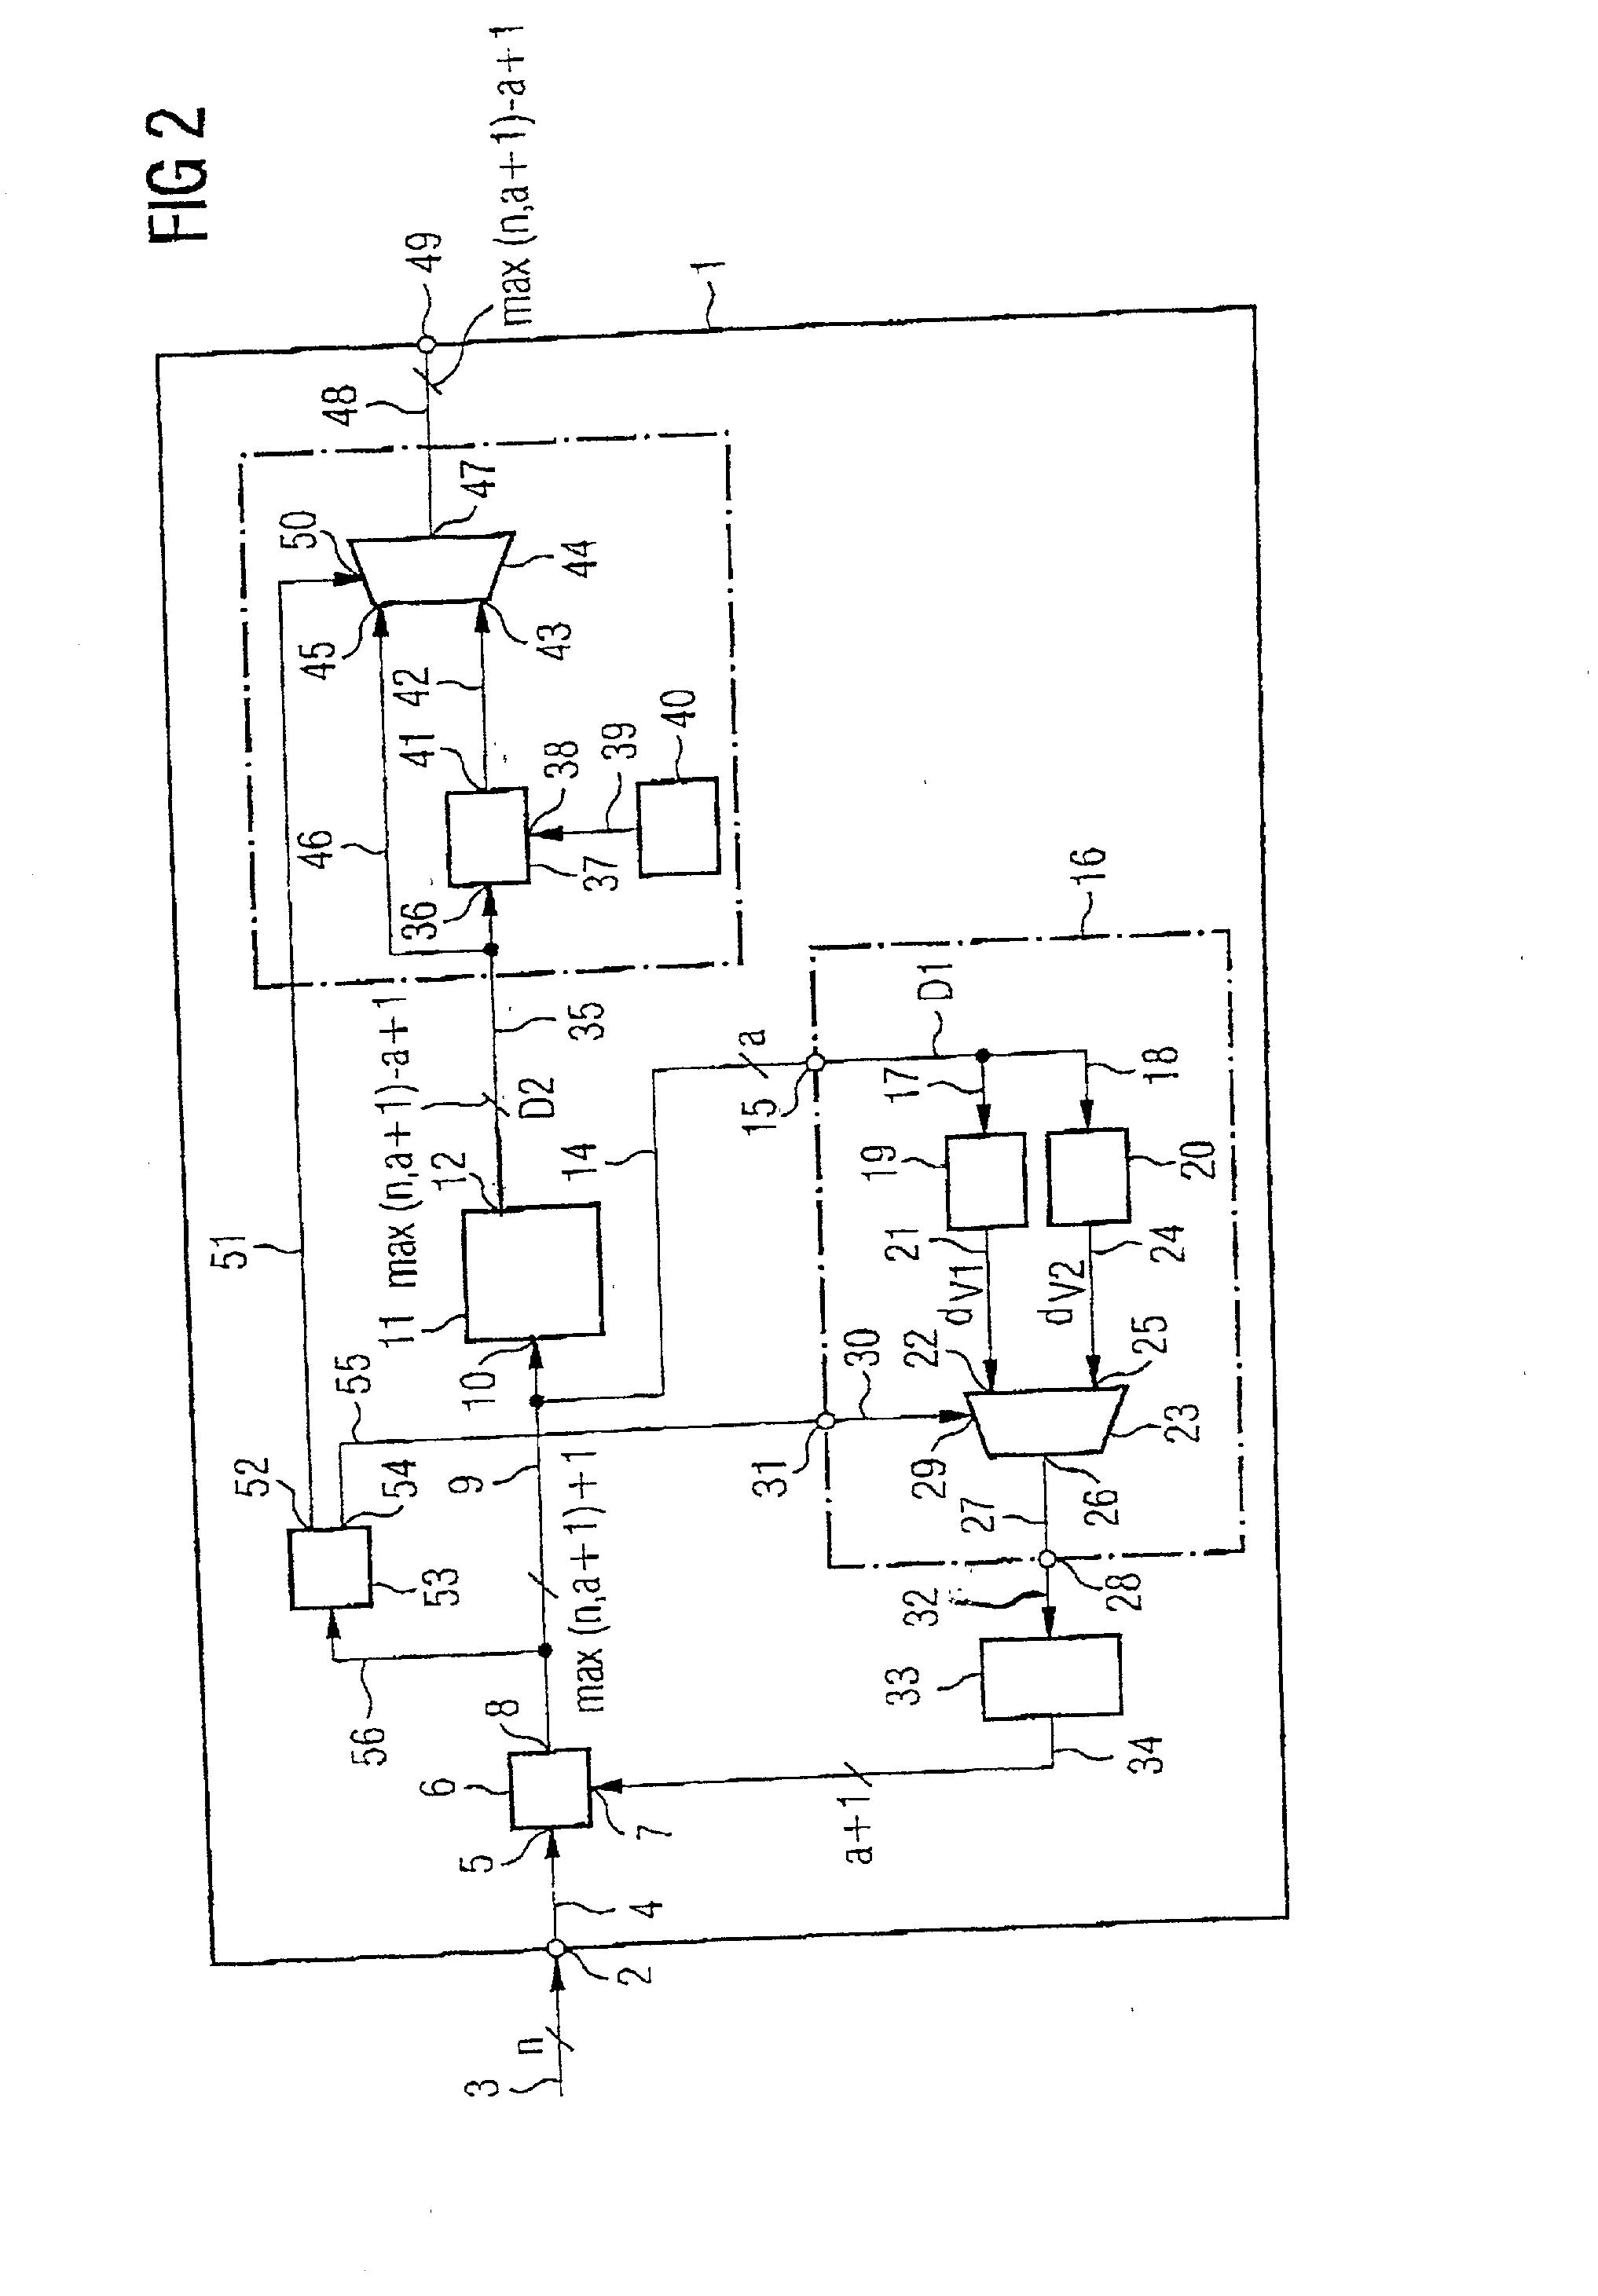 Calculation circuit for the division of a fixed -point signal